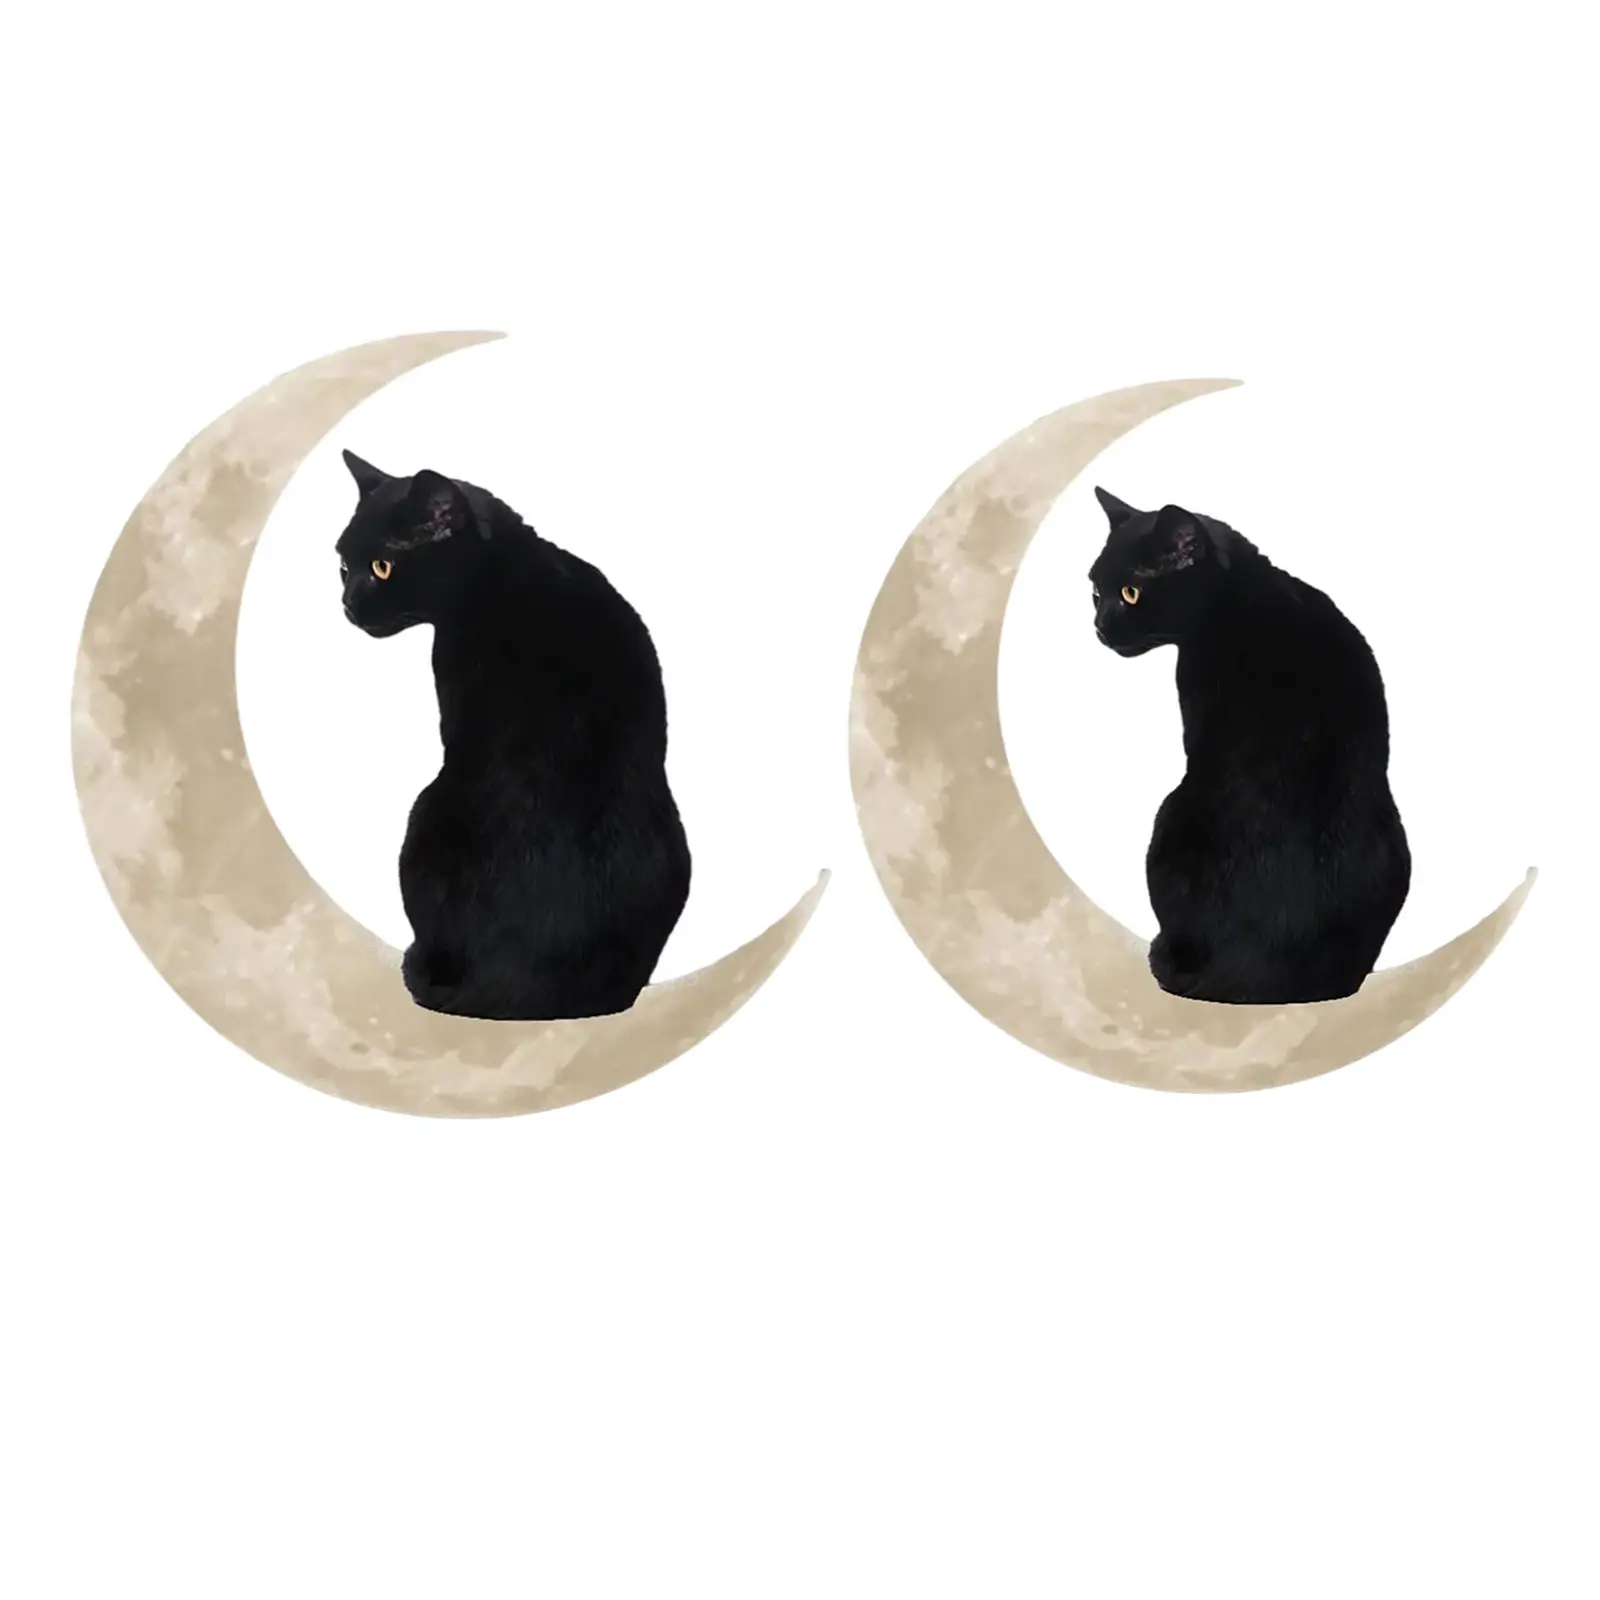 Cat in The Moon Wall Decor Hollow Cut Ornaments Hanging Artwork Animal Gift Cat Lover Metal Wall Art Decor for Bedroom Bathroom